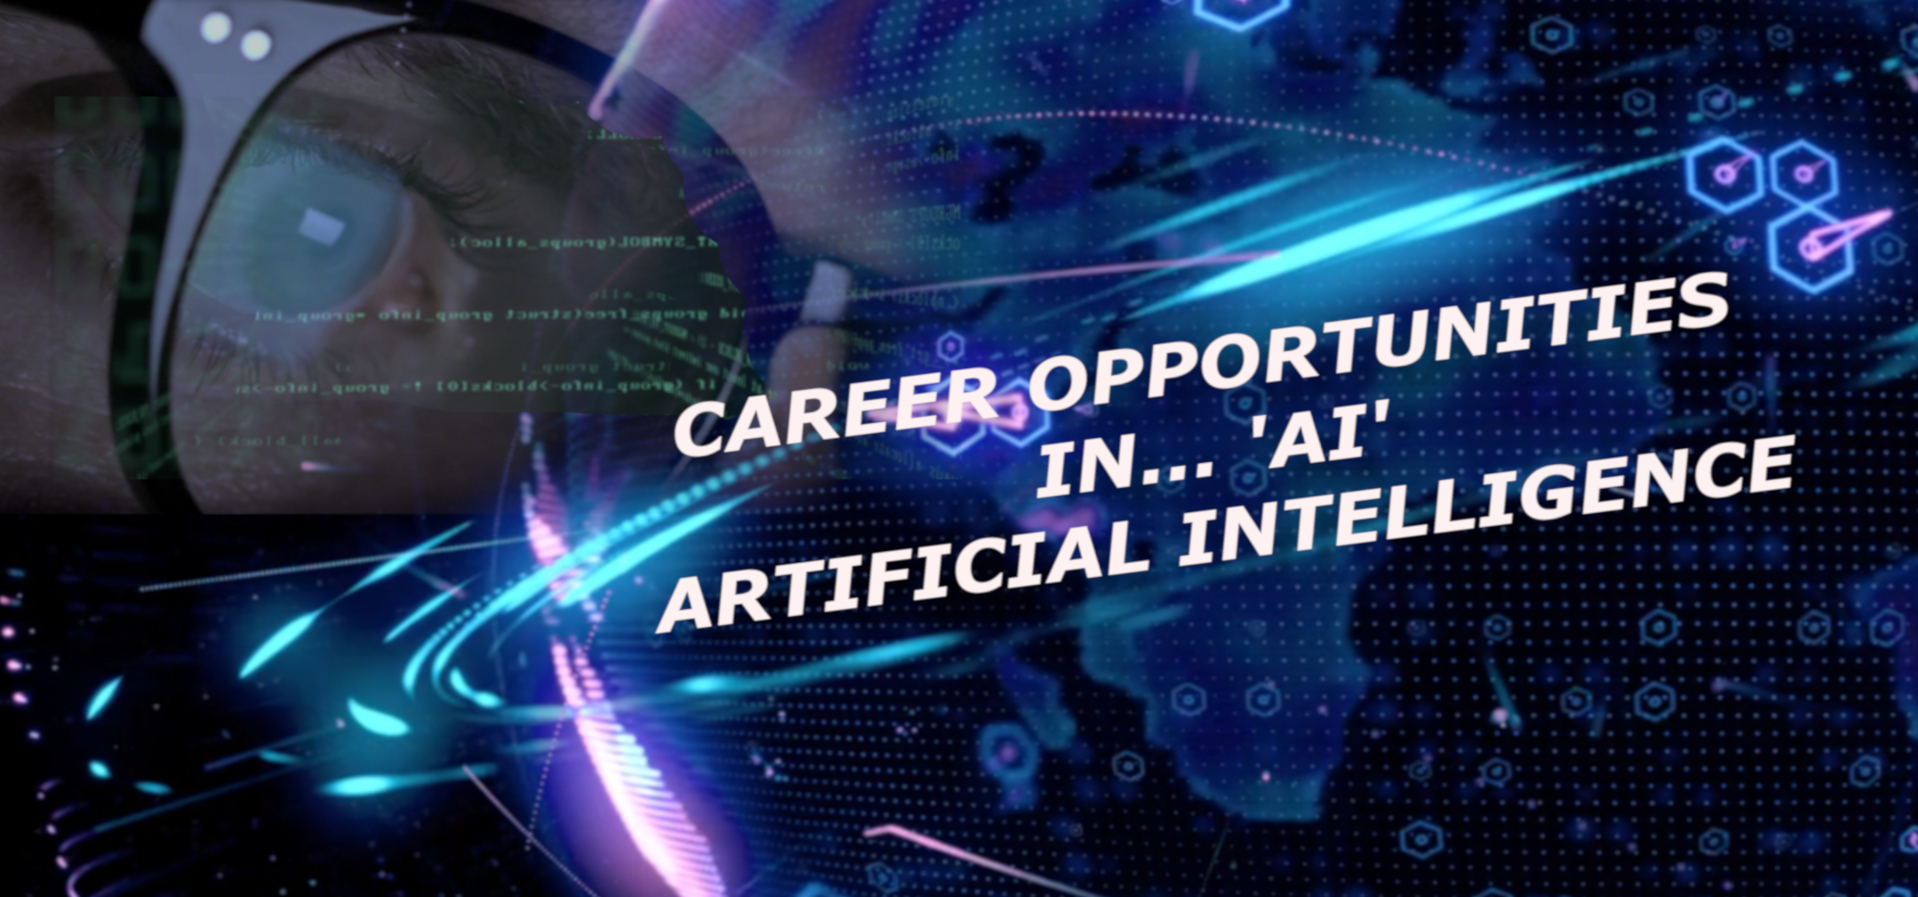 Paralegal LDA careers for Artificial Intelligence AI